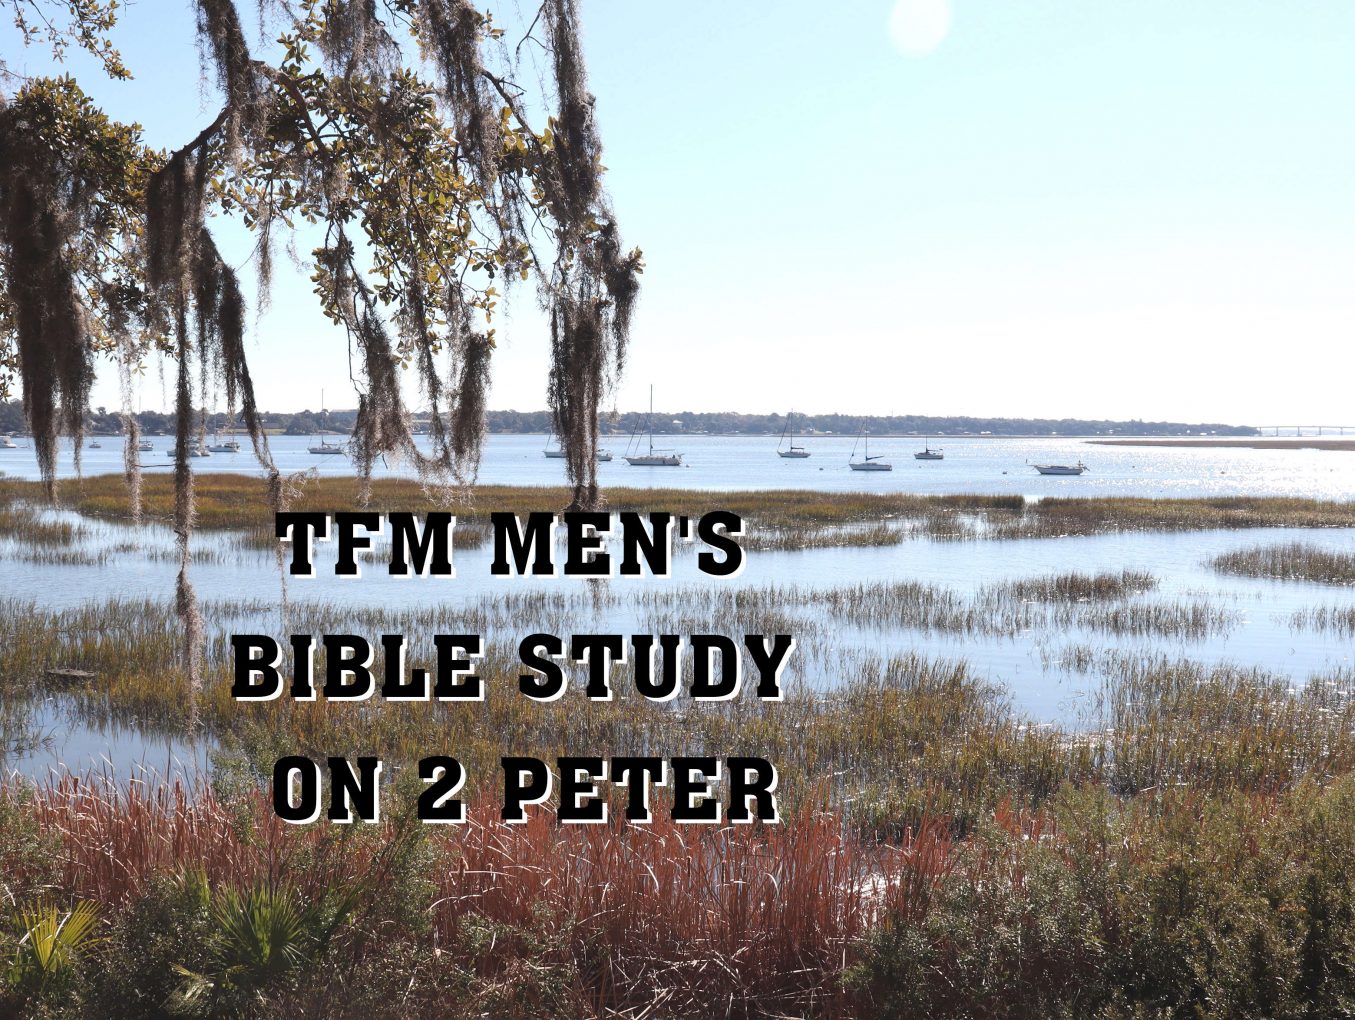 Men's Bible Study on 2 PETER (2014-01-07 TO 2014-01-28)